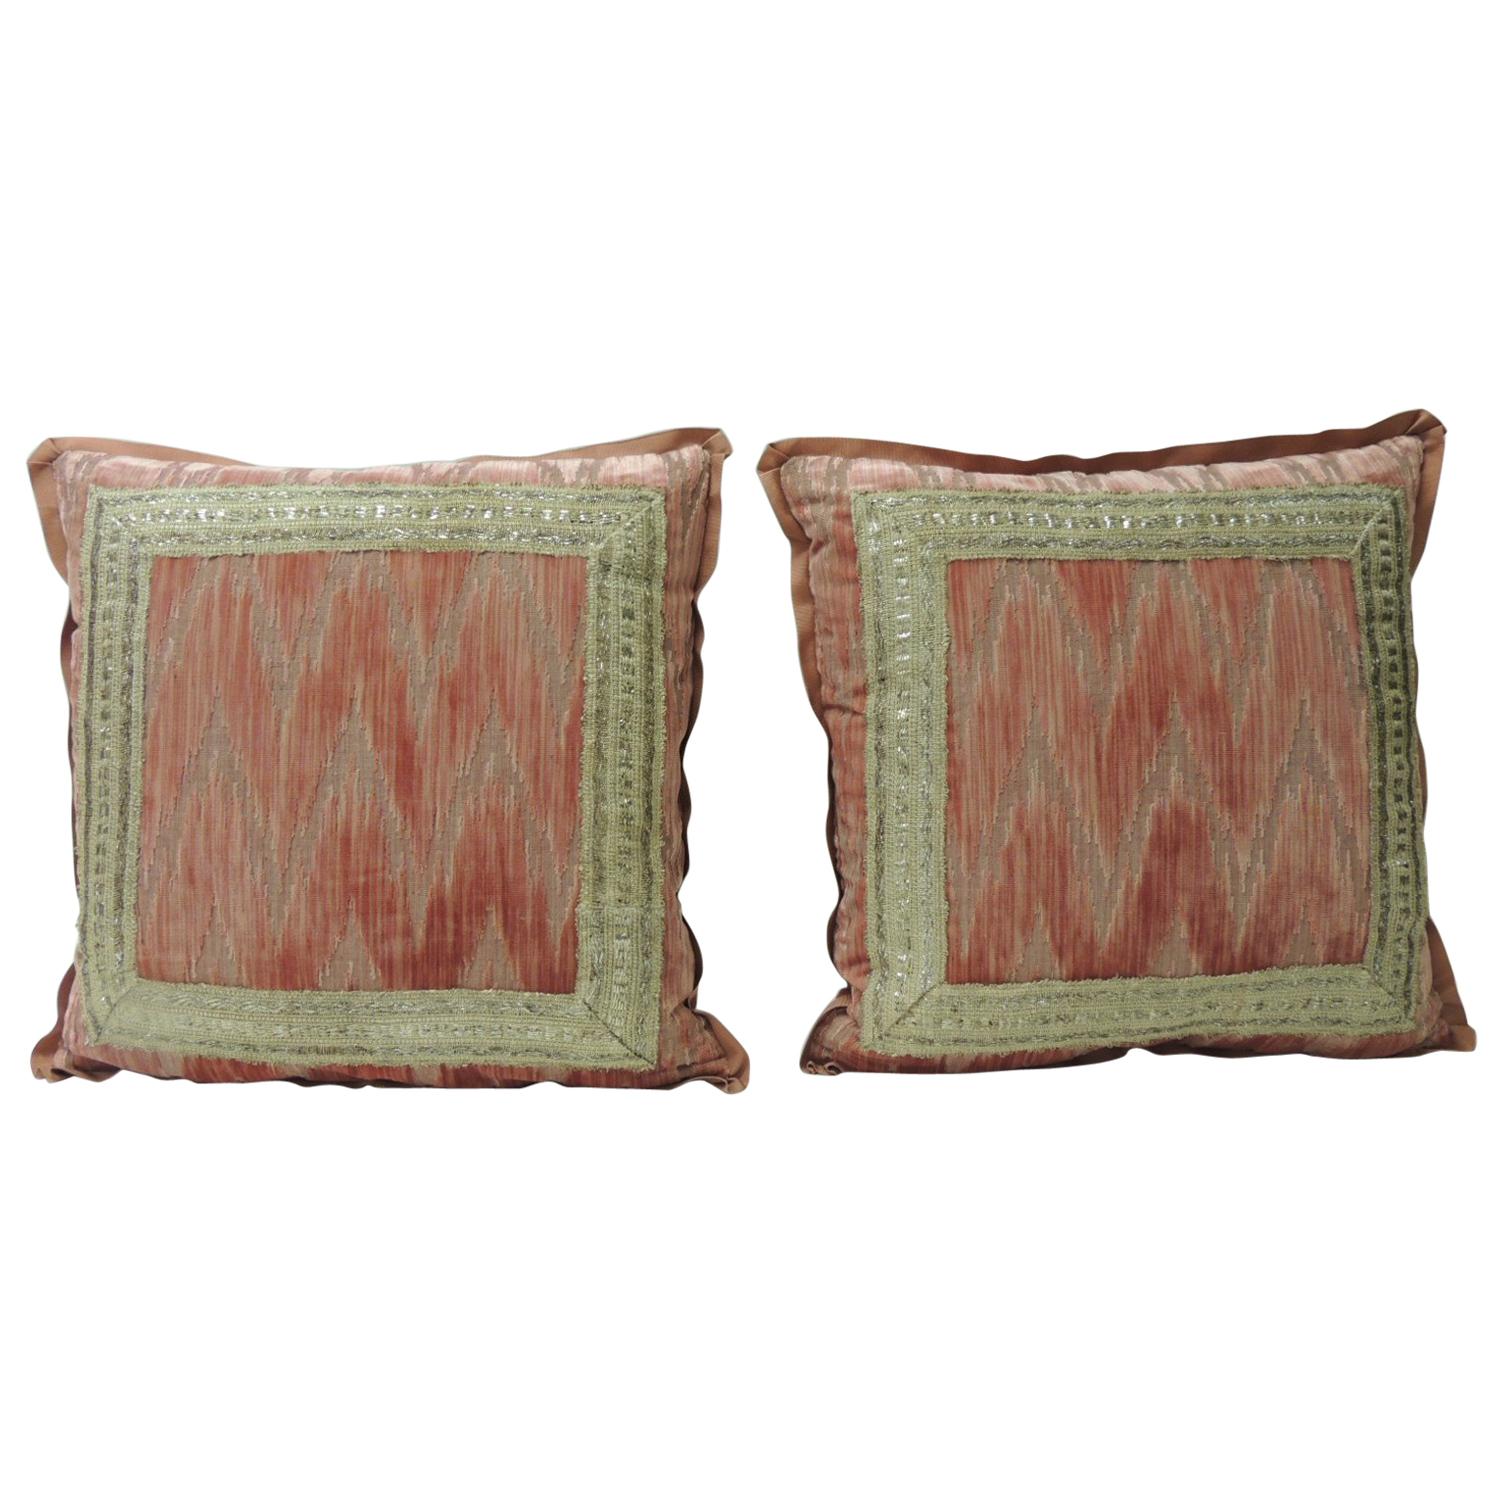 Pair of Antique Pink and Silver Flame Stitch Silk Velvet Decorative Pillows